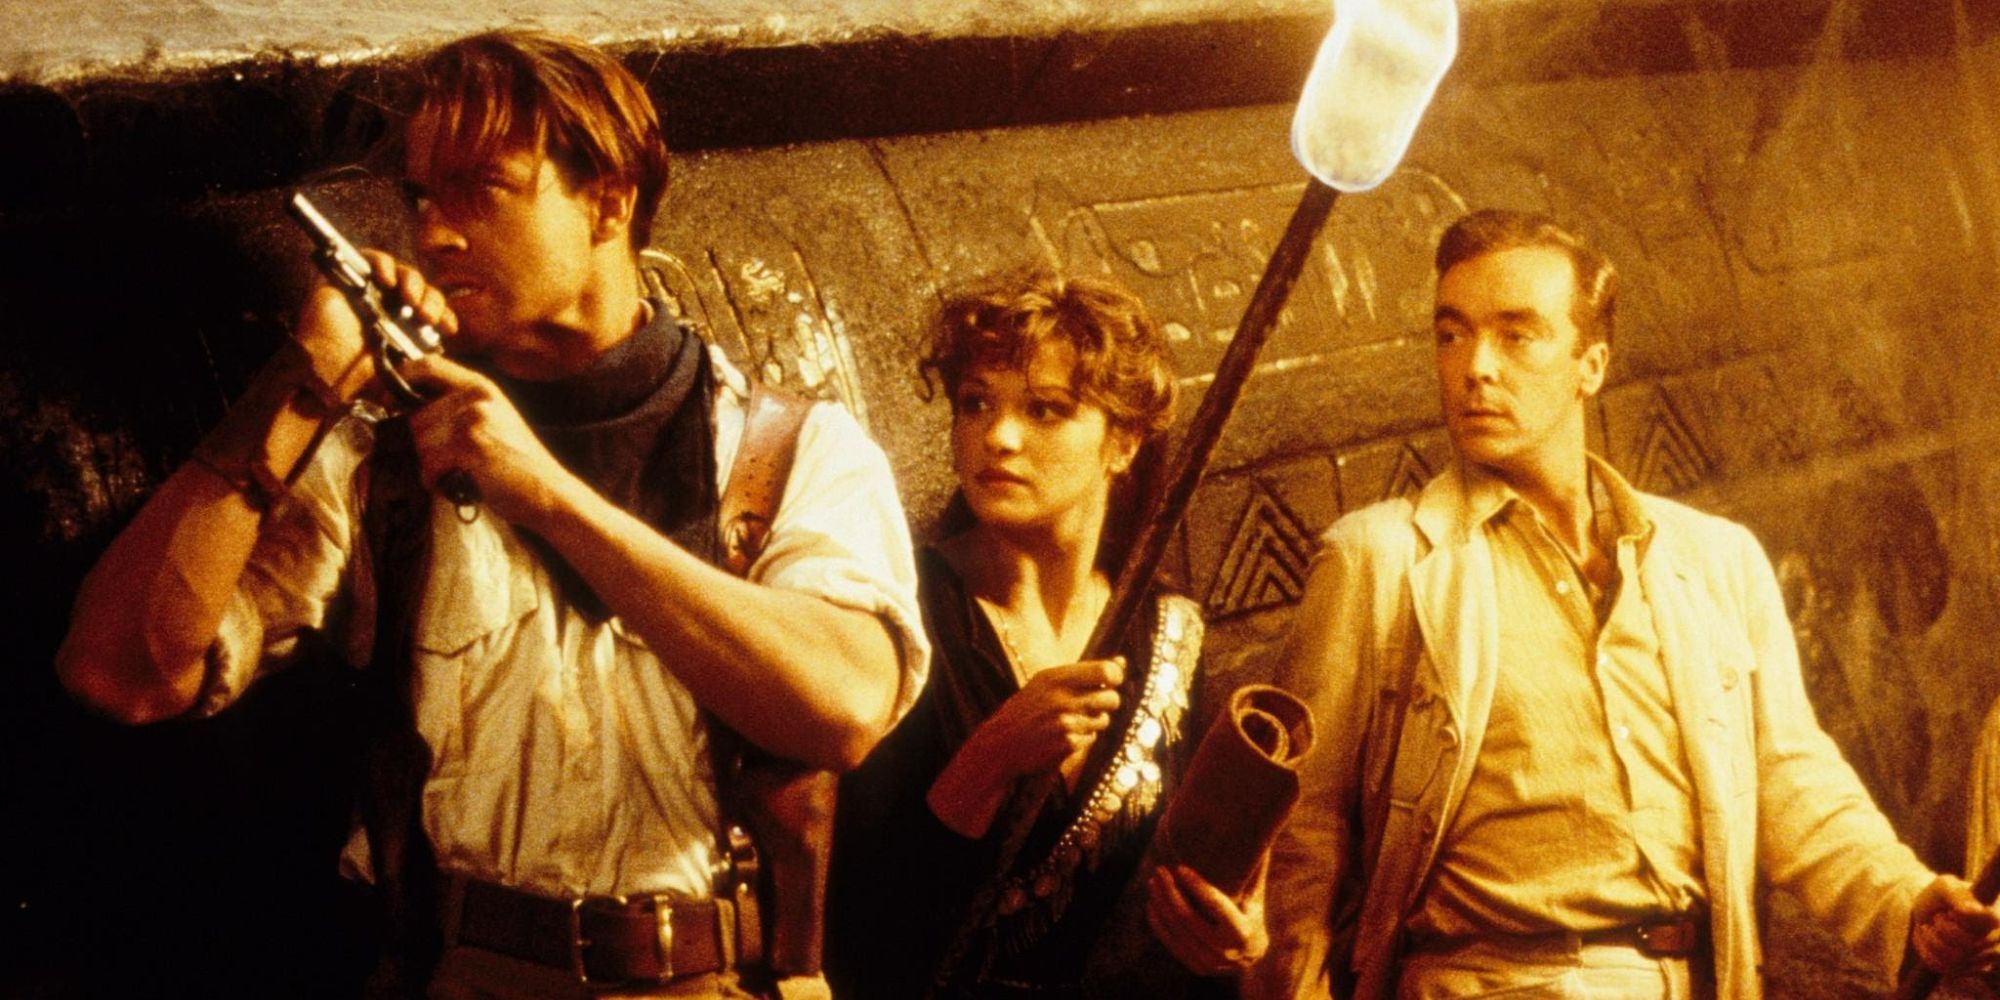 Rick leads Evelyn and her brother through a tomb in The Mummy